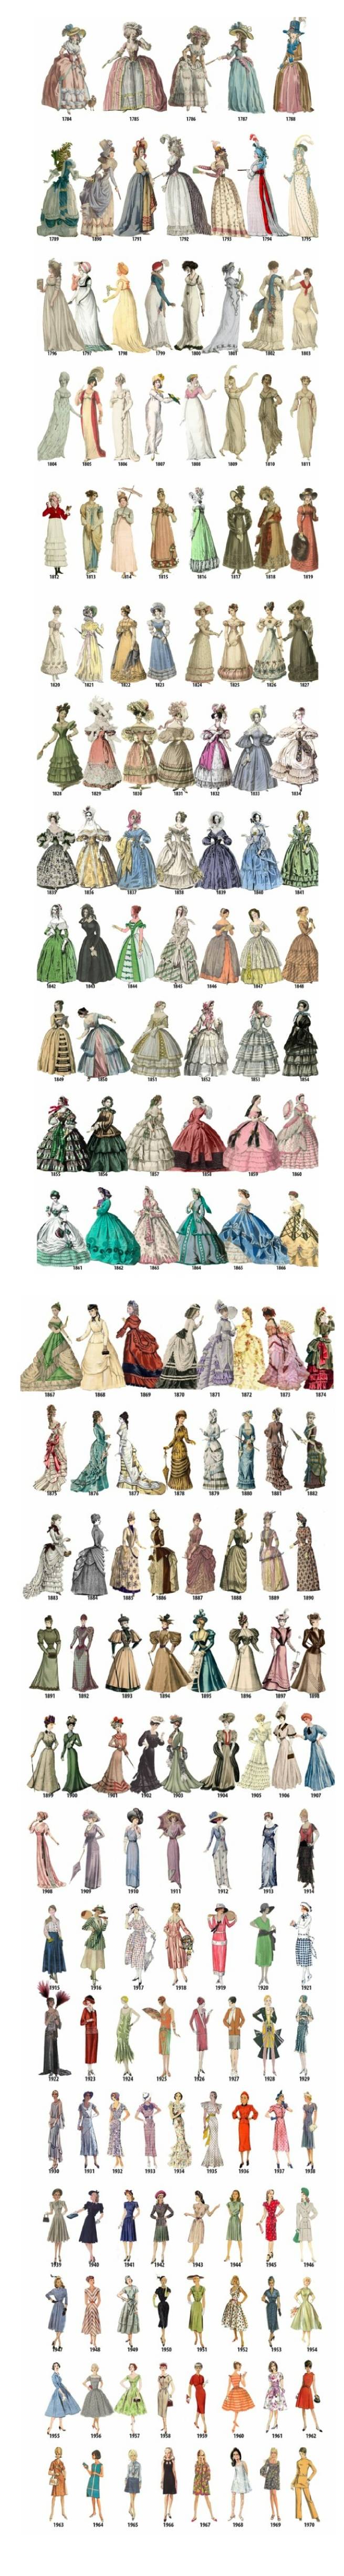 The evolution of women's fashion over nearly 200 years